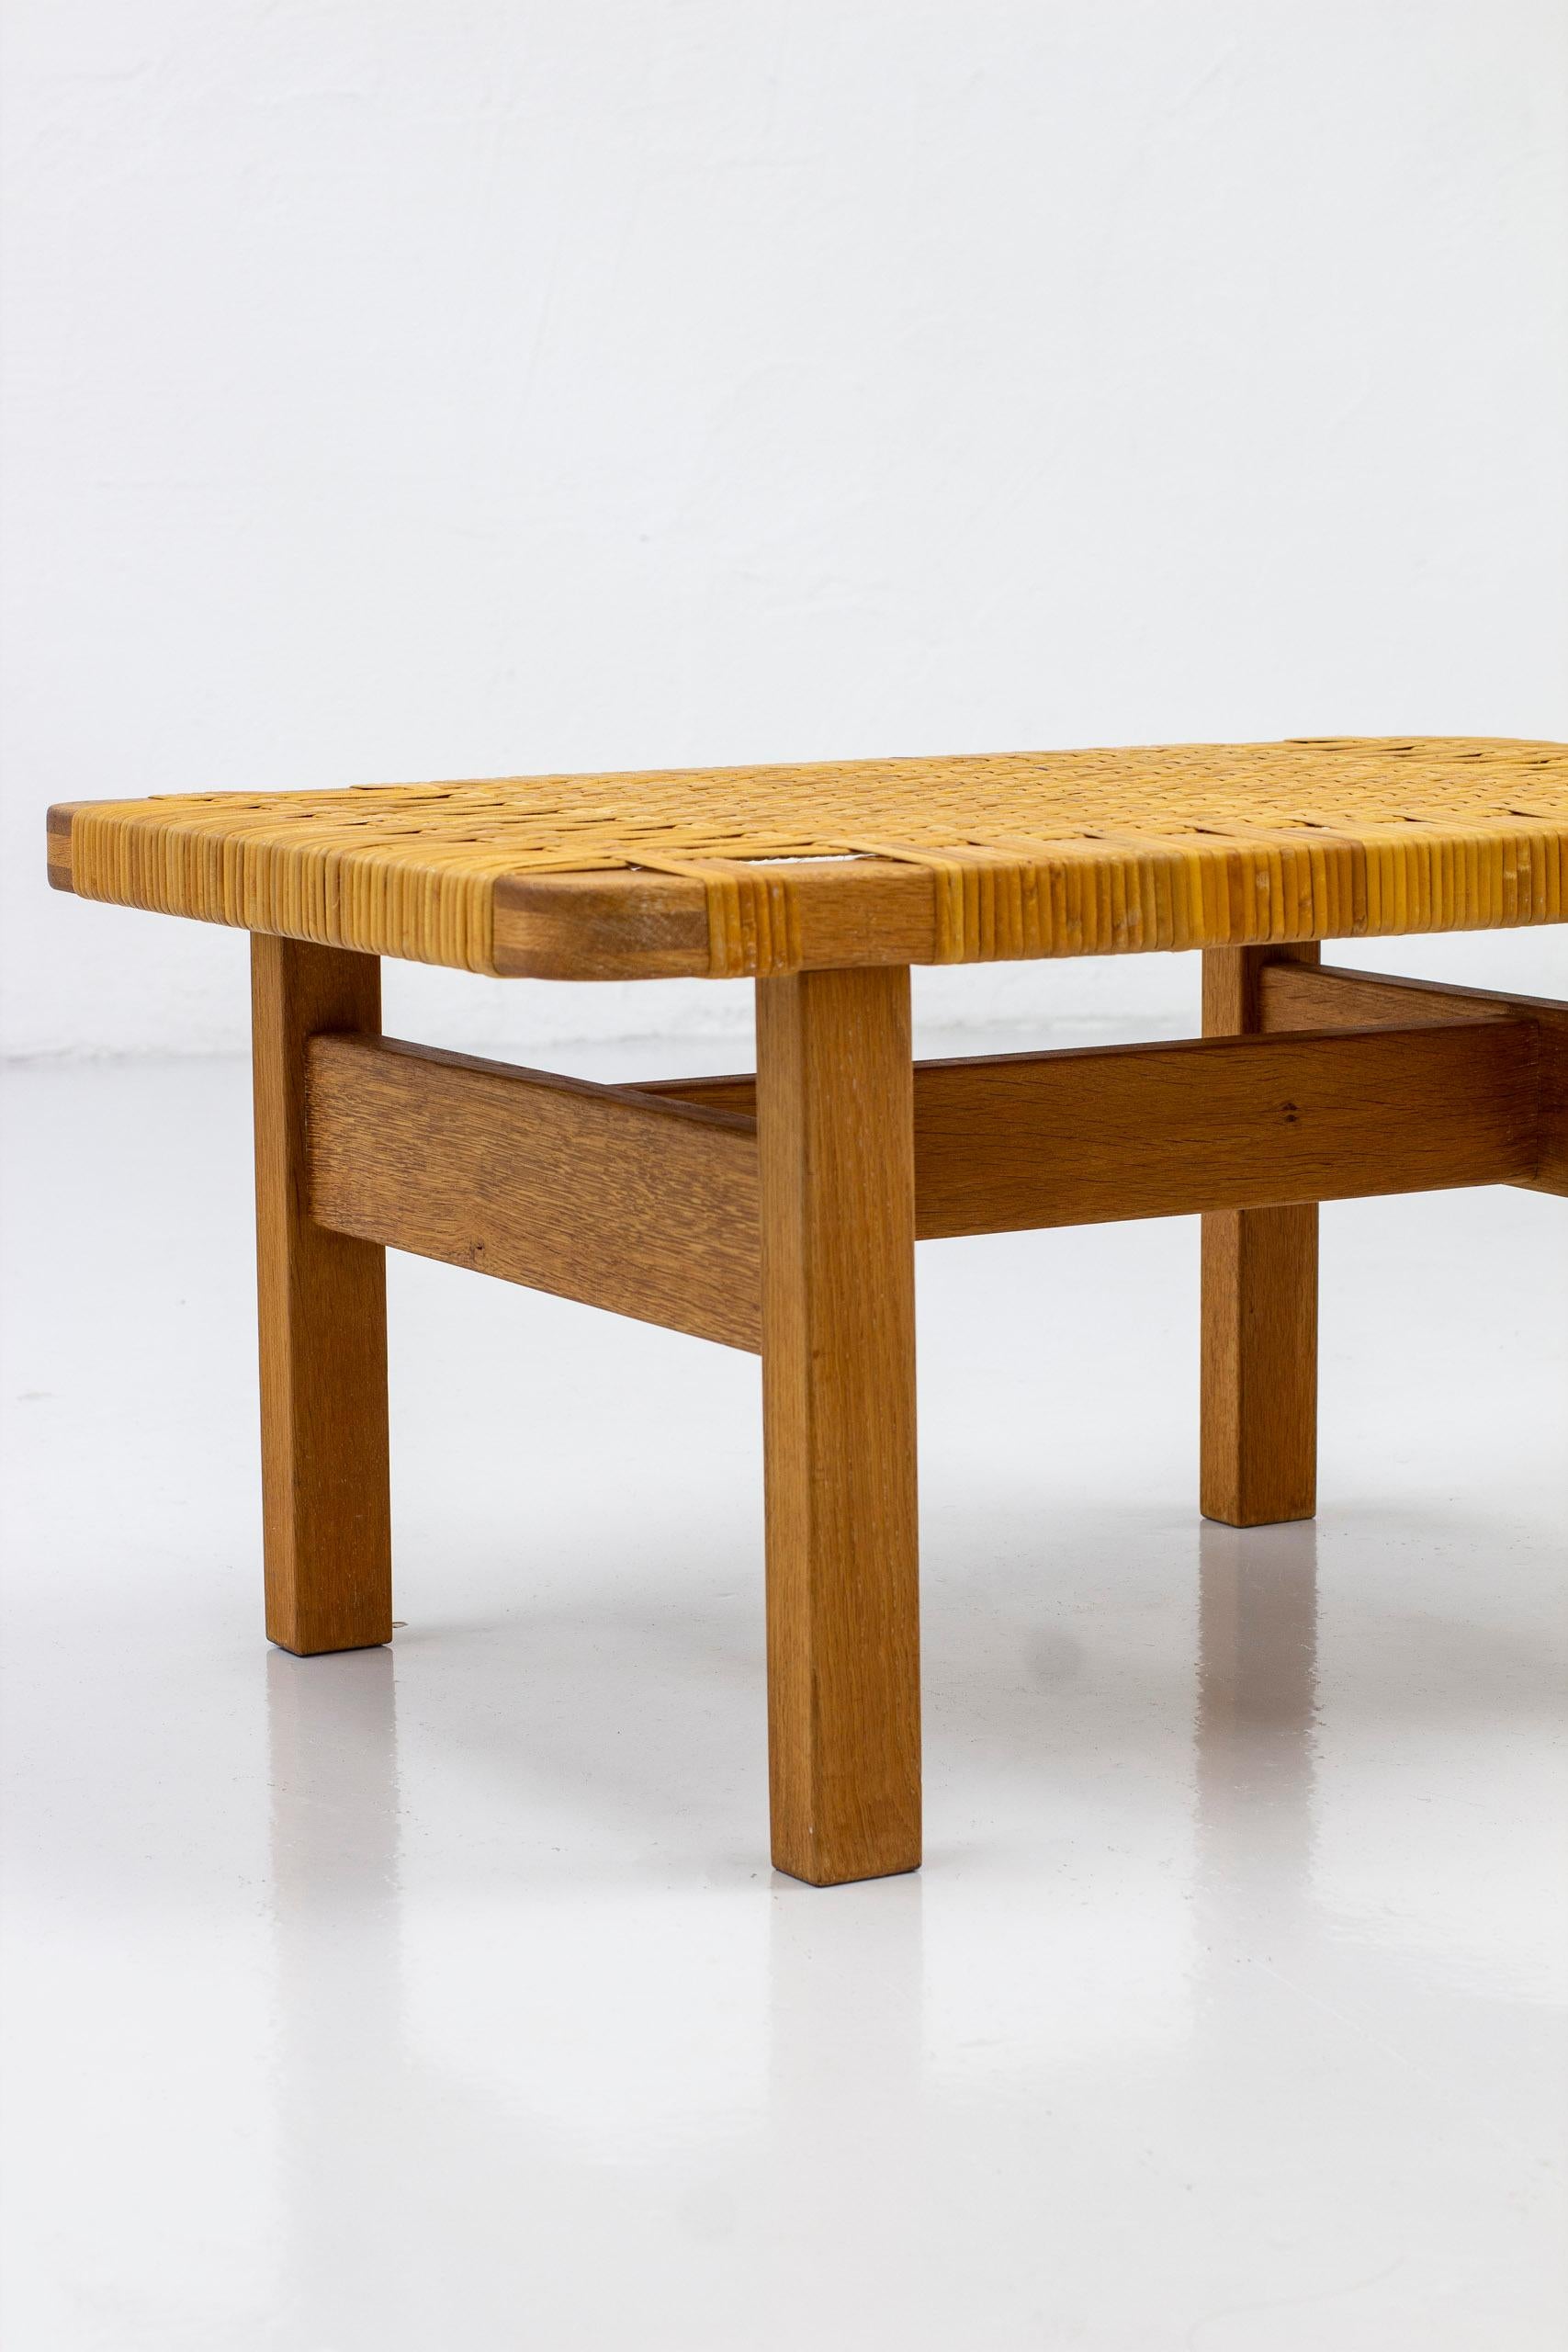 Side Table in Oka and Cane by Børge Mogensen for Fredericia, Denmark, 1950s For Sale 1